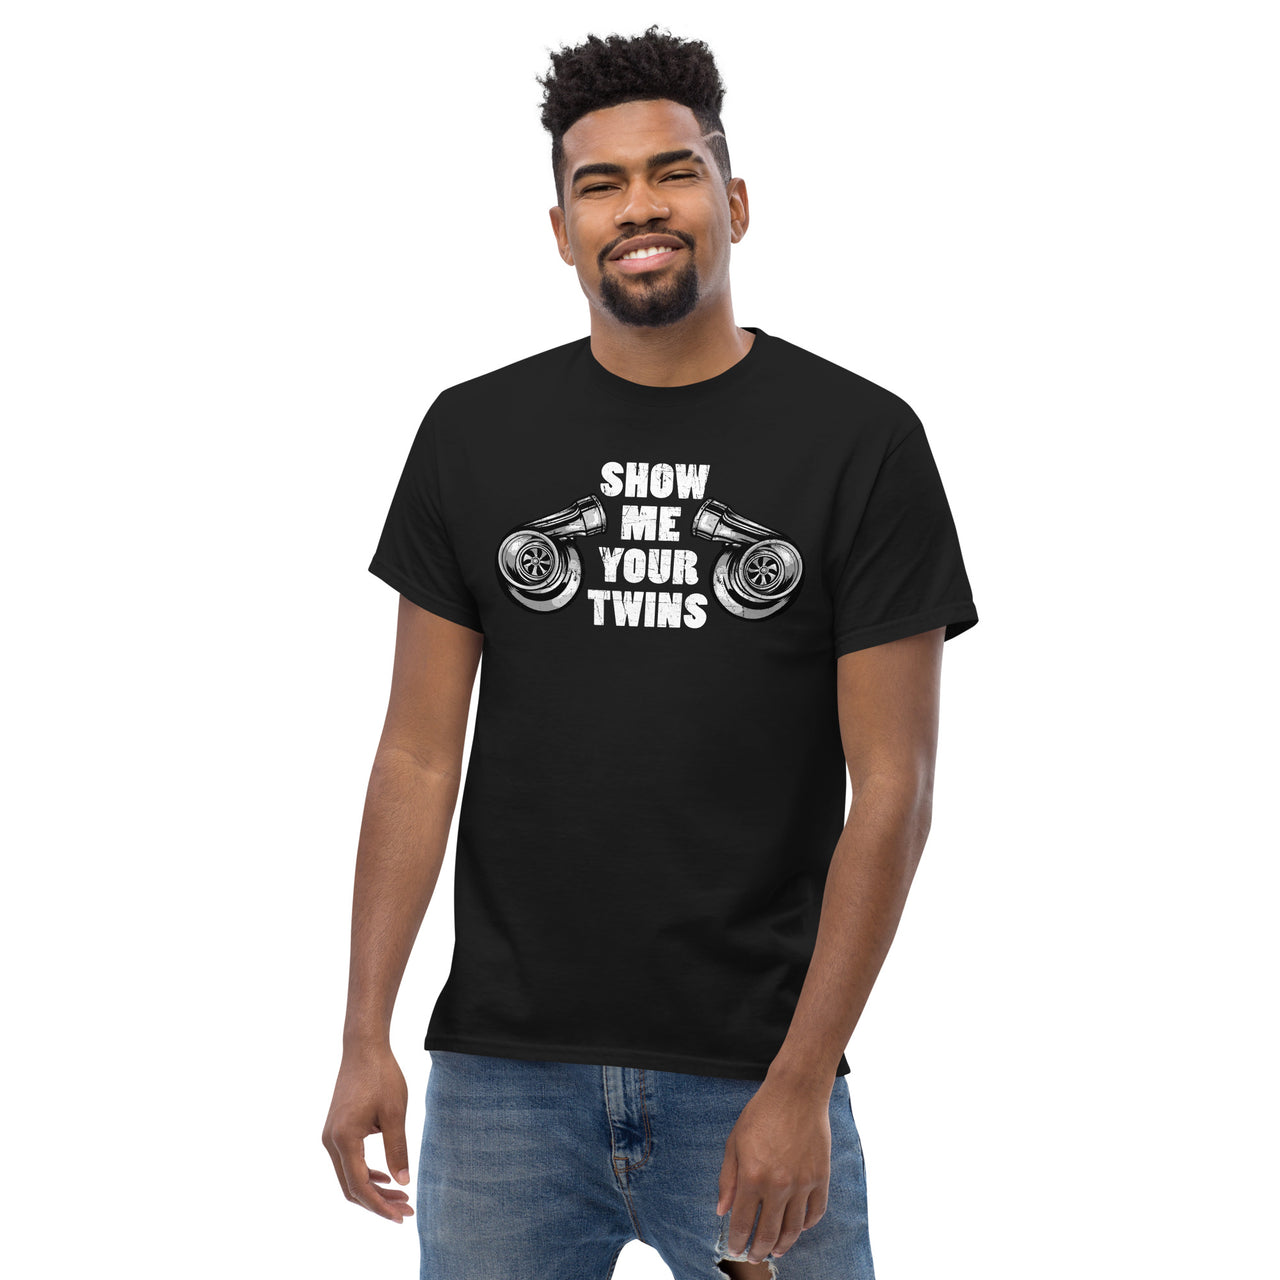 Show Me Your Twins Funny Turbo T-Shirt modeled  in black